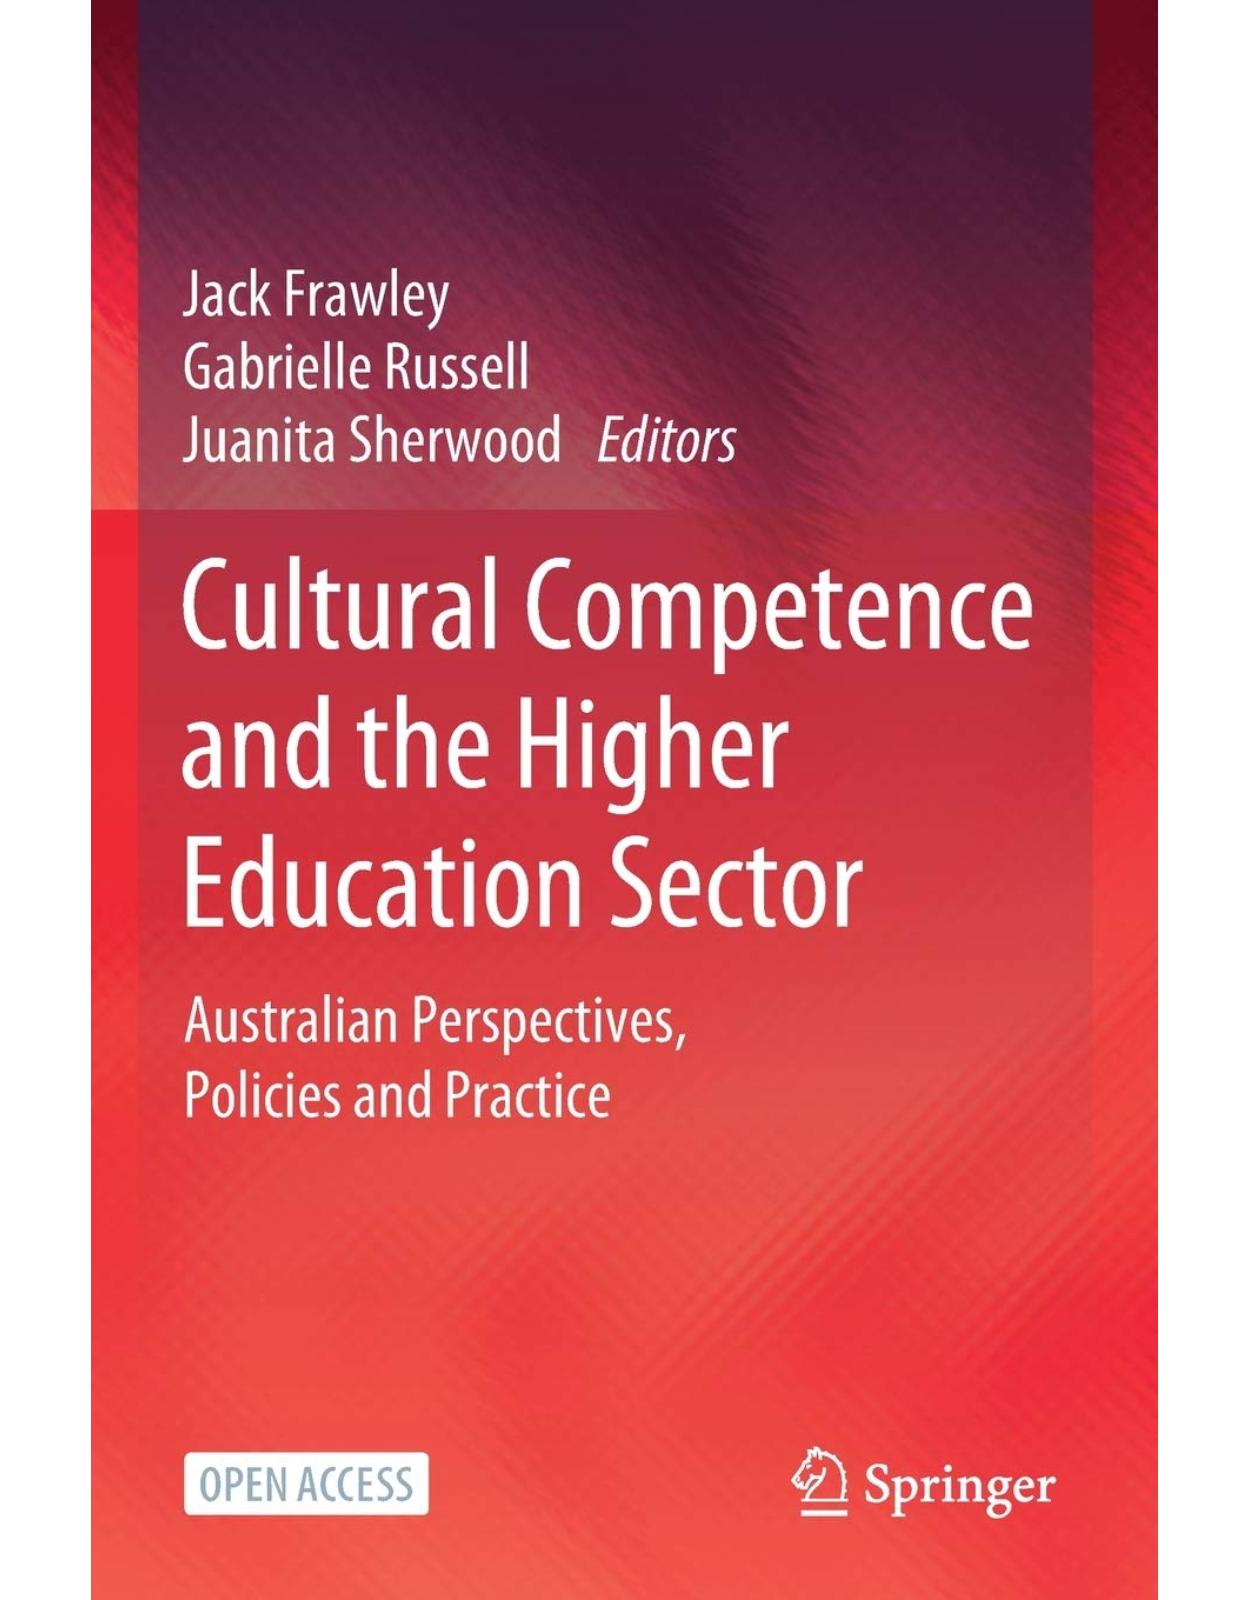 Cultural Competence and the Higher Education Sector: Australian Perspectives, Policies and Practice